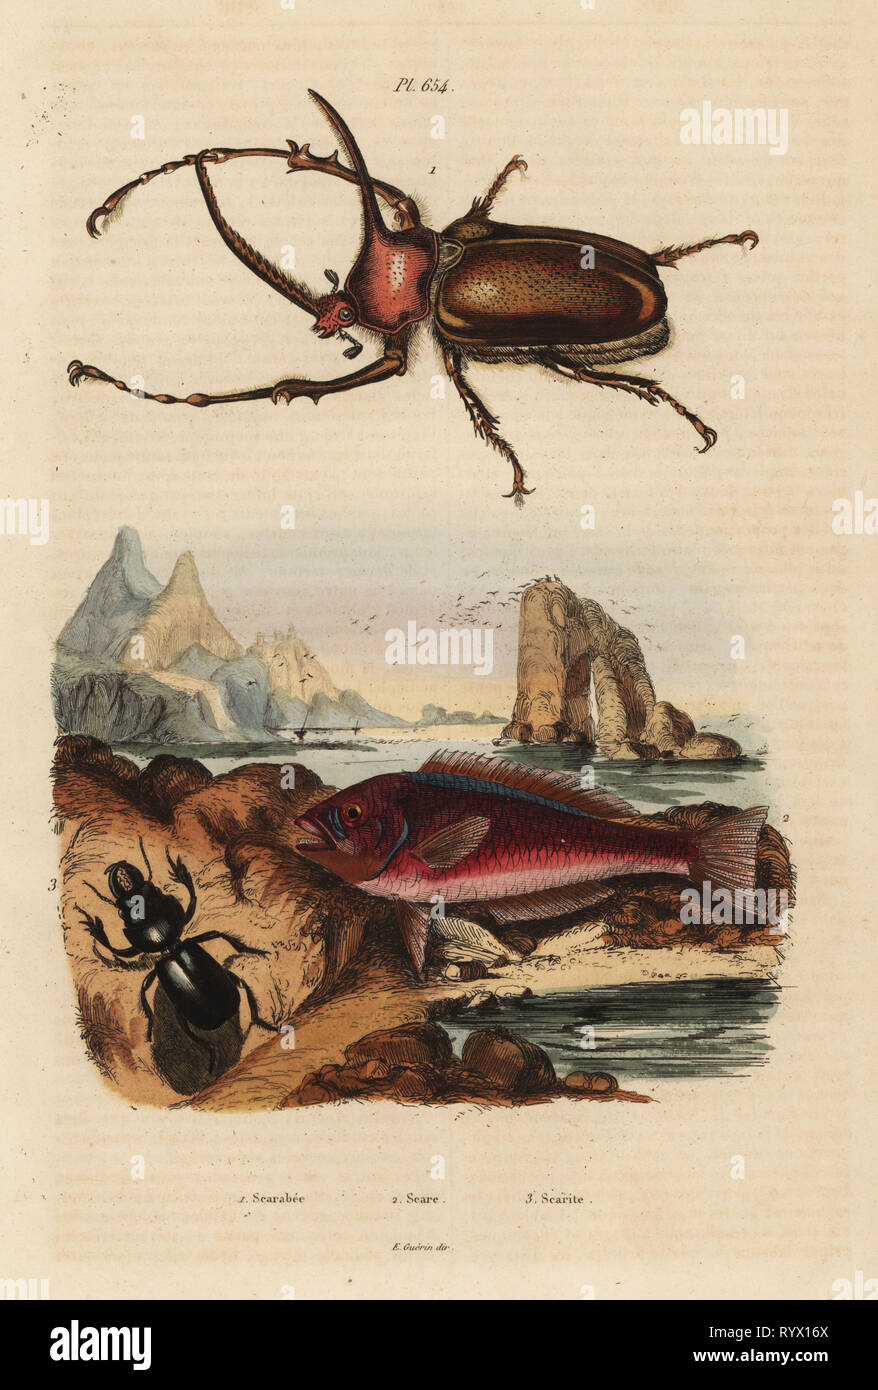 Rhinoceros scarab beetle, Golofa porteri 1, Cretan scar-fish, Scarus creticus 2, and Scarites buparius beetle 3. Scarabee, Scare, Scarite. Handcoloured steel engraving by du Casse after an illustration by Adolph Fries from Felix-Edouard Guerin-Meneville's Dictionnaire Pittoresque d'Histoire Naturelle (Picturesque Dictionary of Natural History), Paris, 1834-39. Stock Photo